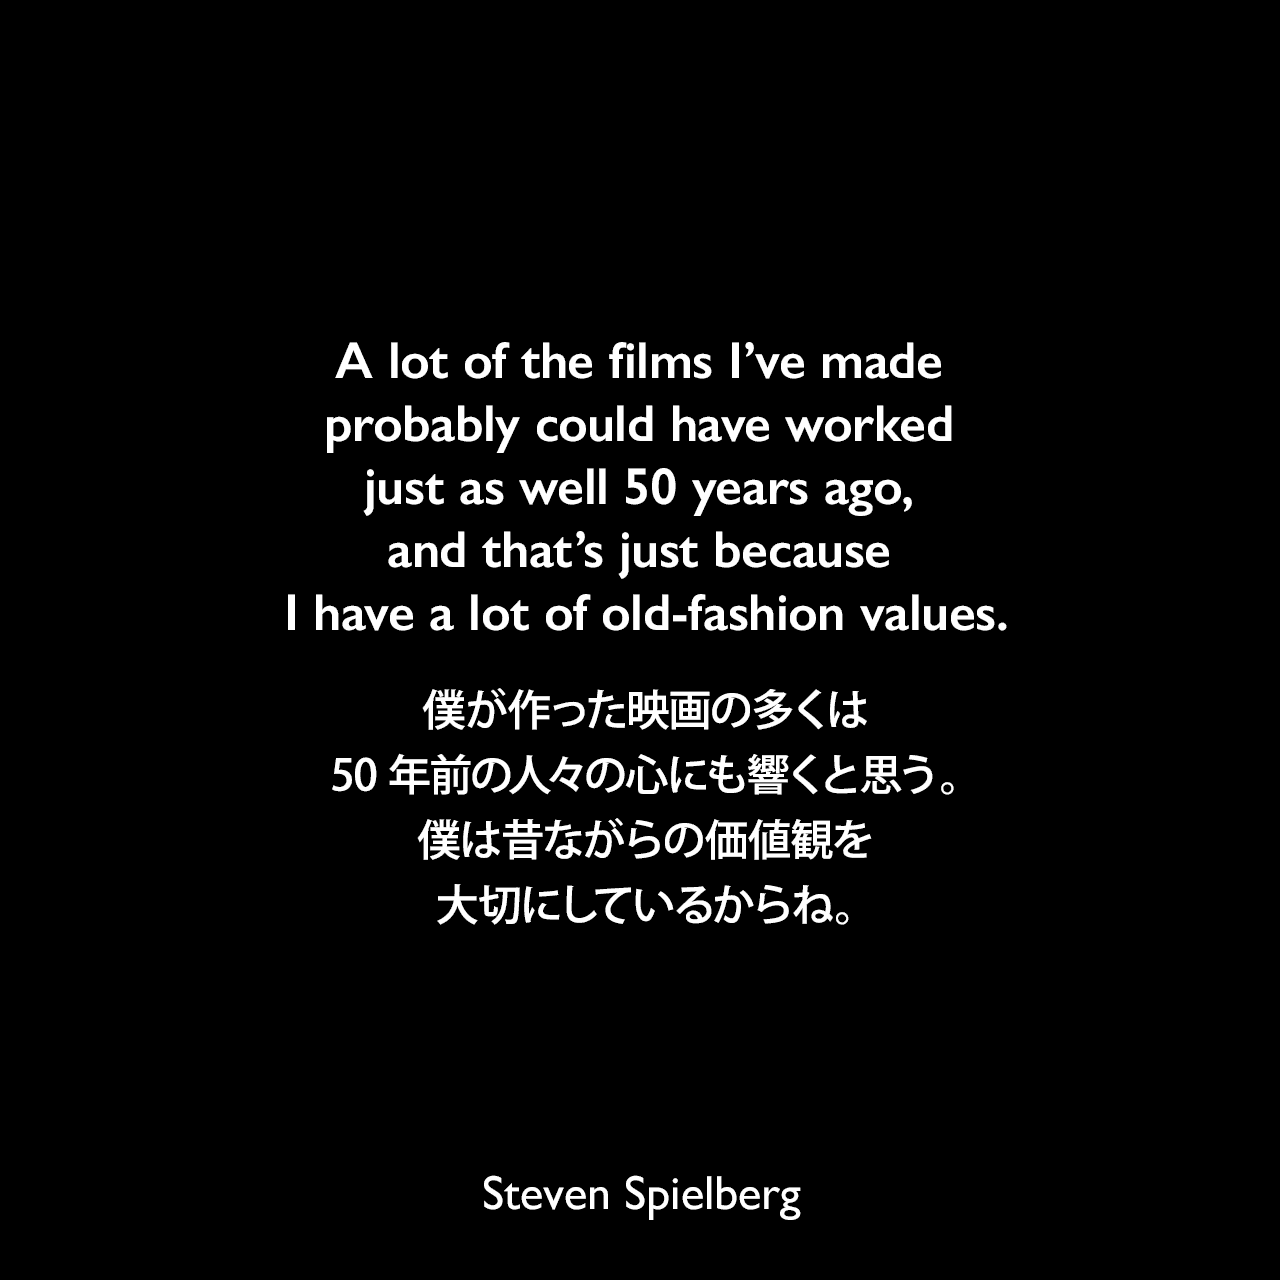 A lot of the films I’ve made probably could have worked just as well 50 years ago, and that’s just because I have a lot of old-fashion values.僕が作った映画の多くは、50年前の人々の心にも響くと思う。僕は昔ながらの価値観を大切にしているからね。Steven Spielberg